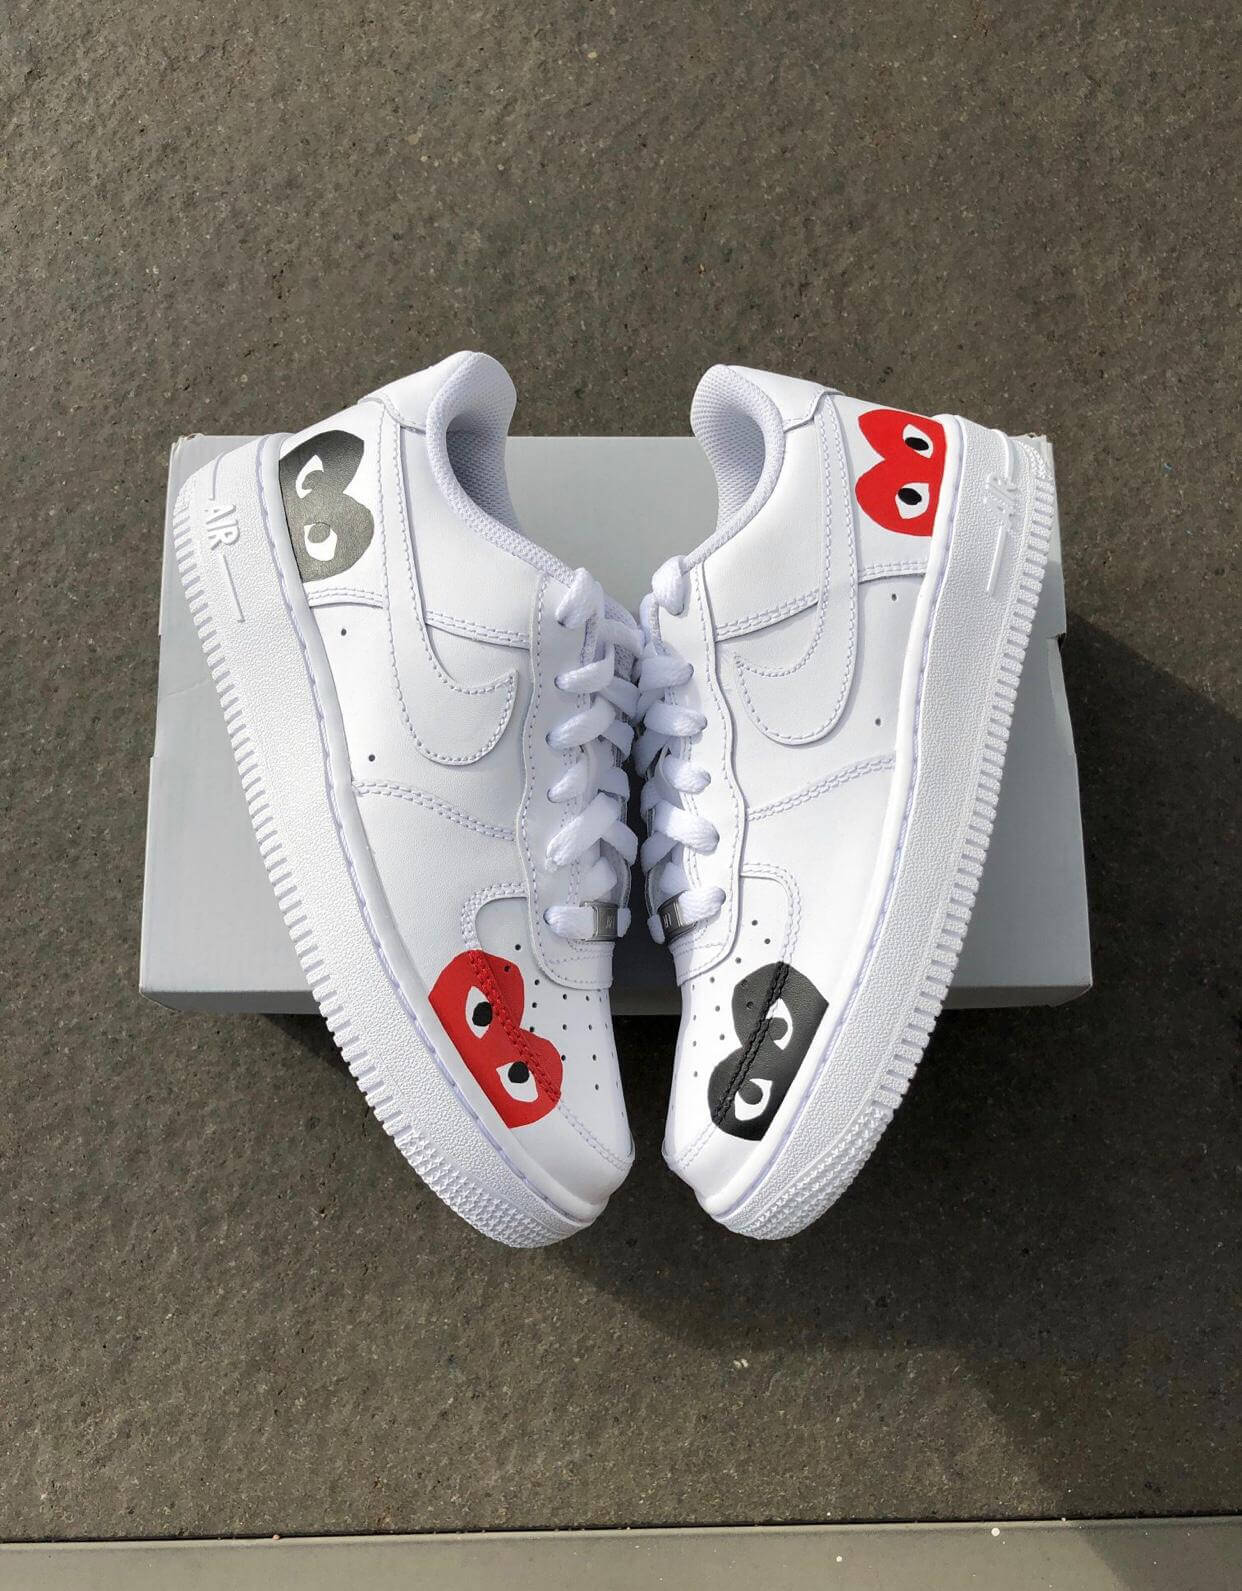 high end designer brand commes des garcon heart hand painted on well known sneaker brand nike sneakers nike air force 1, great for all hypebeasts